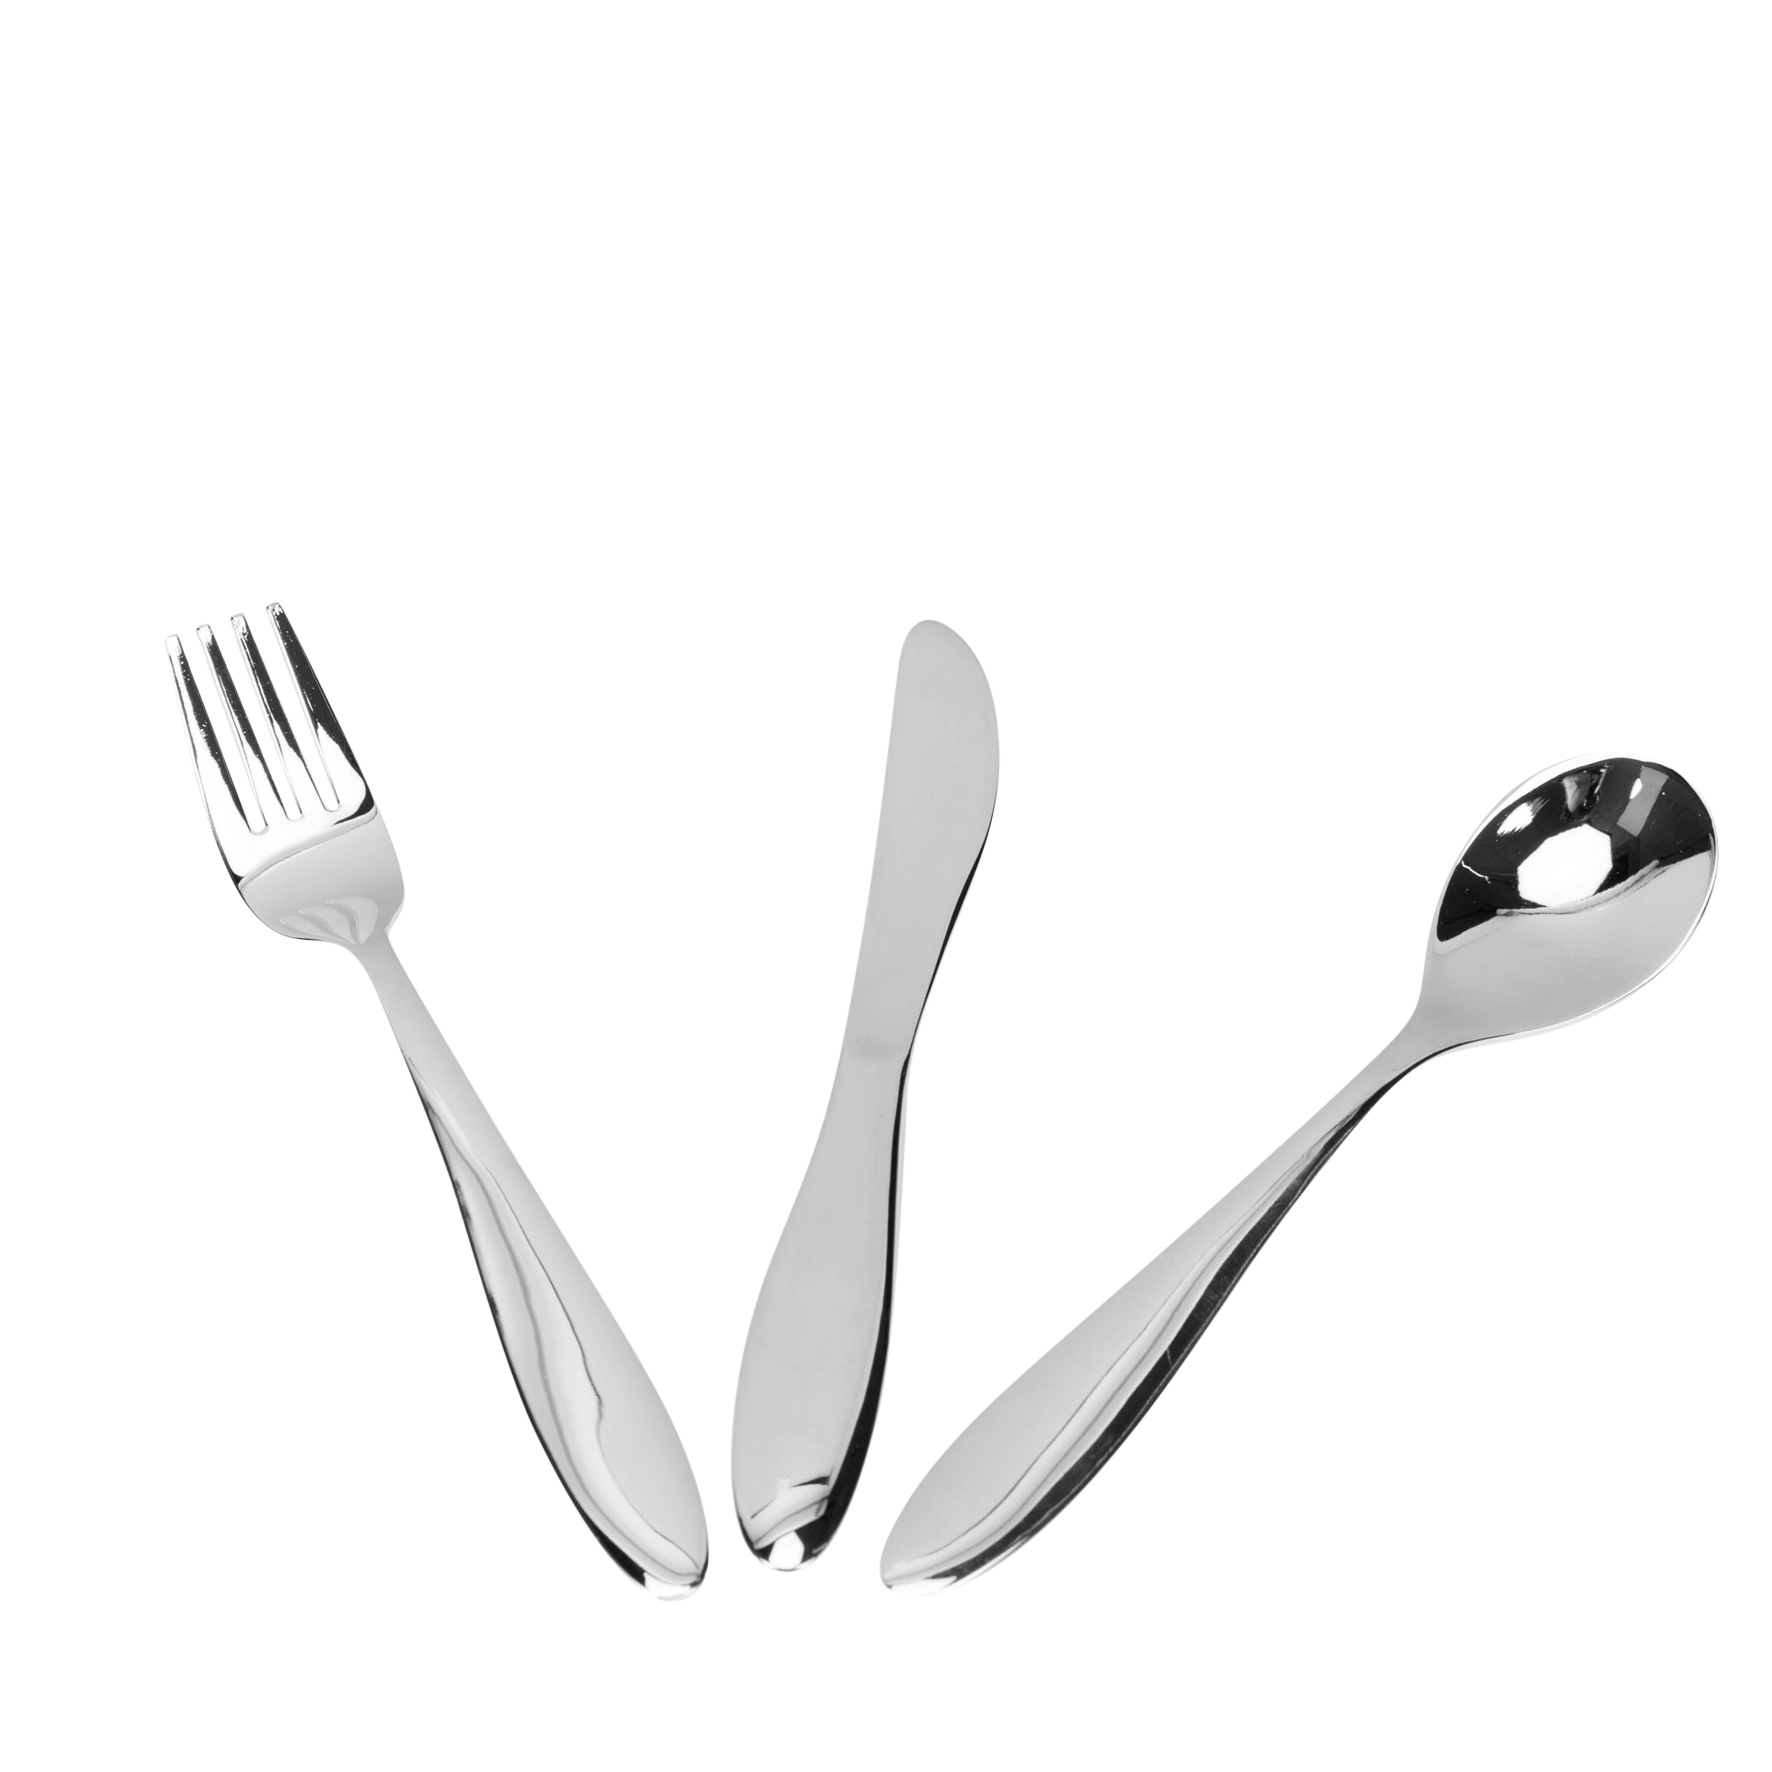 BABY SILVER PLATED KNIFE, FORK AND SPOON